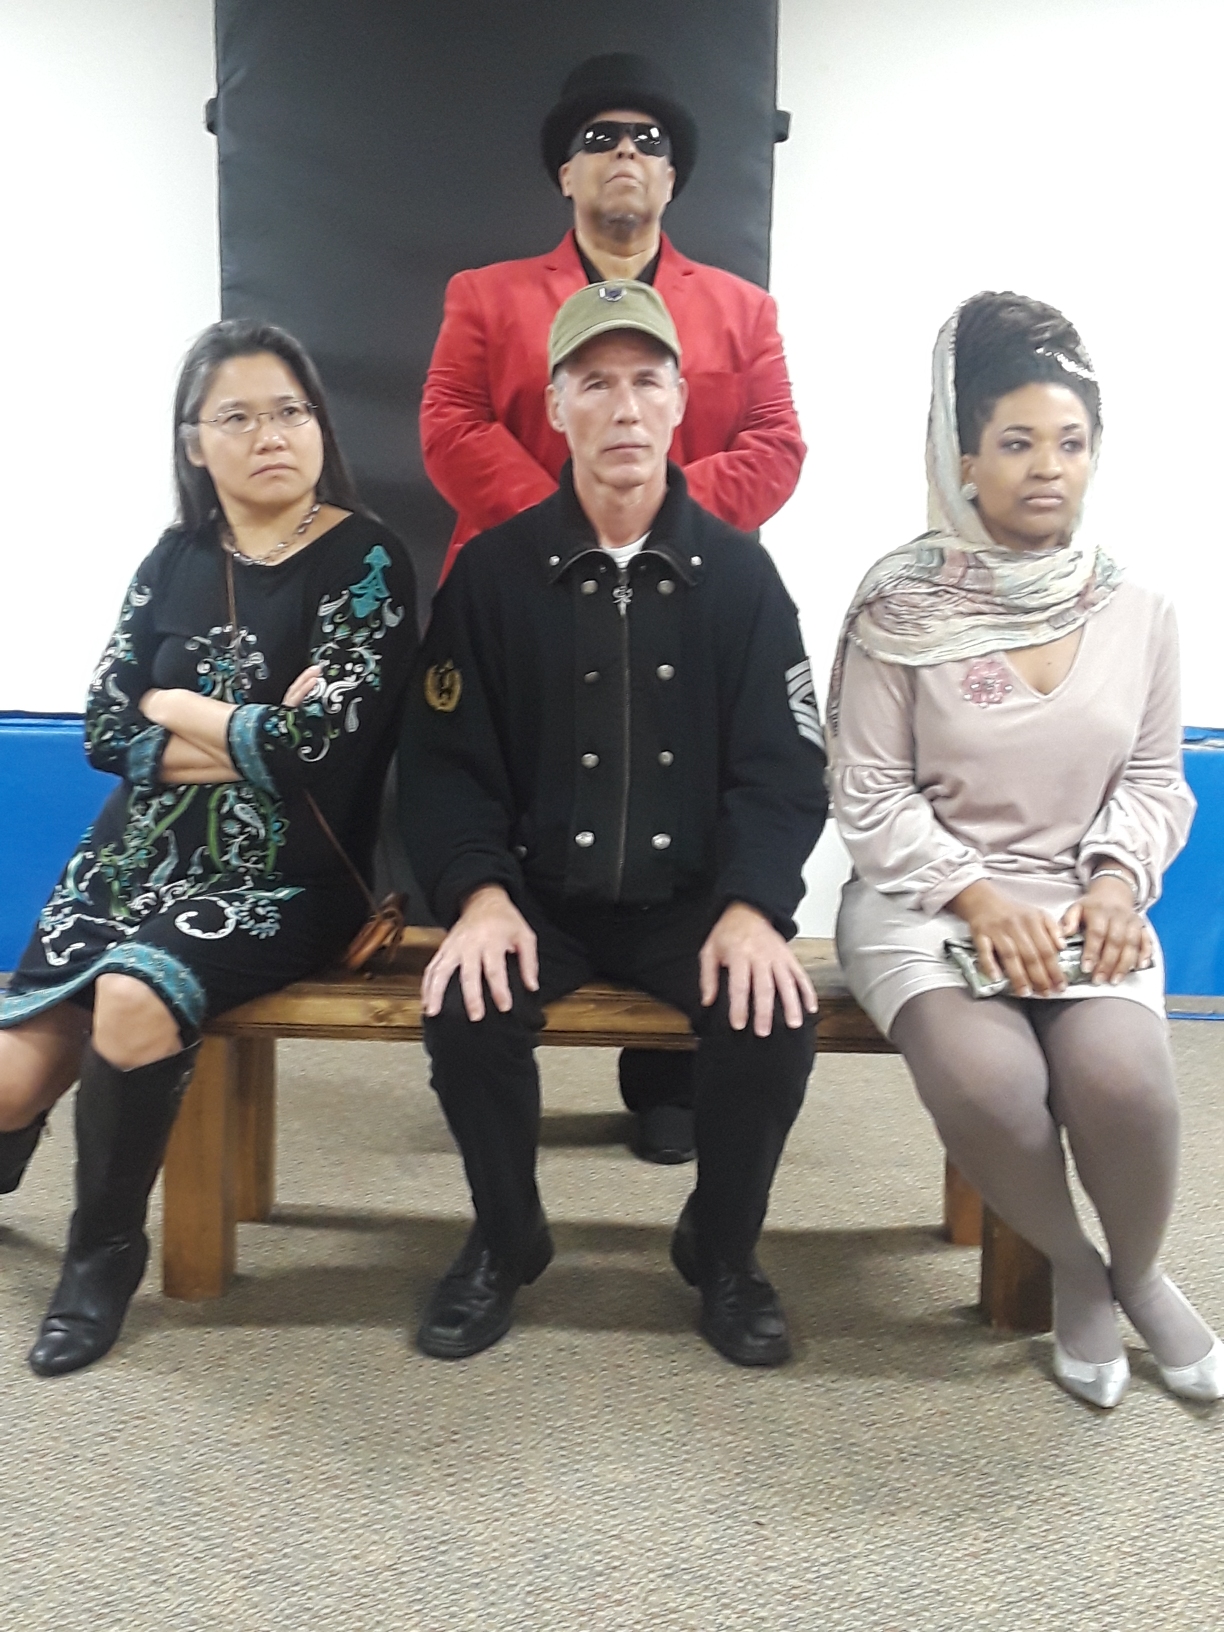 The full cast of "No Exit" features, from left, Rosita Choy, Tillmon Figgs (rear), Todd Leatherbury and Karen E. Lawrence.